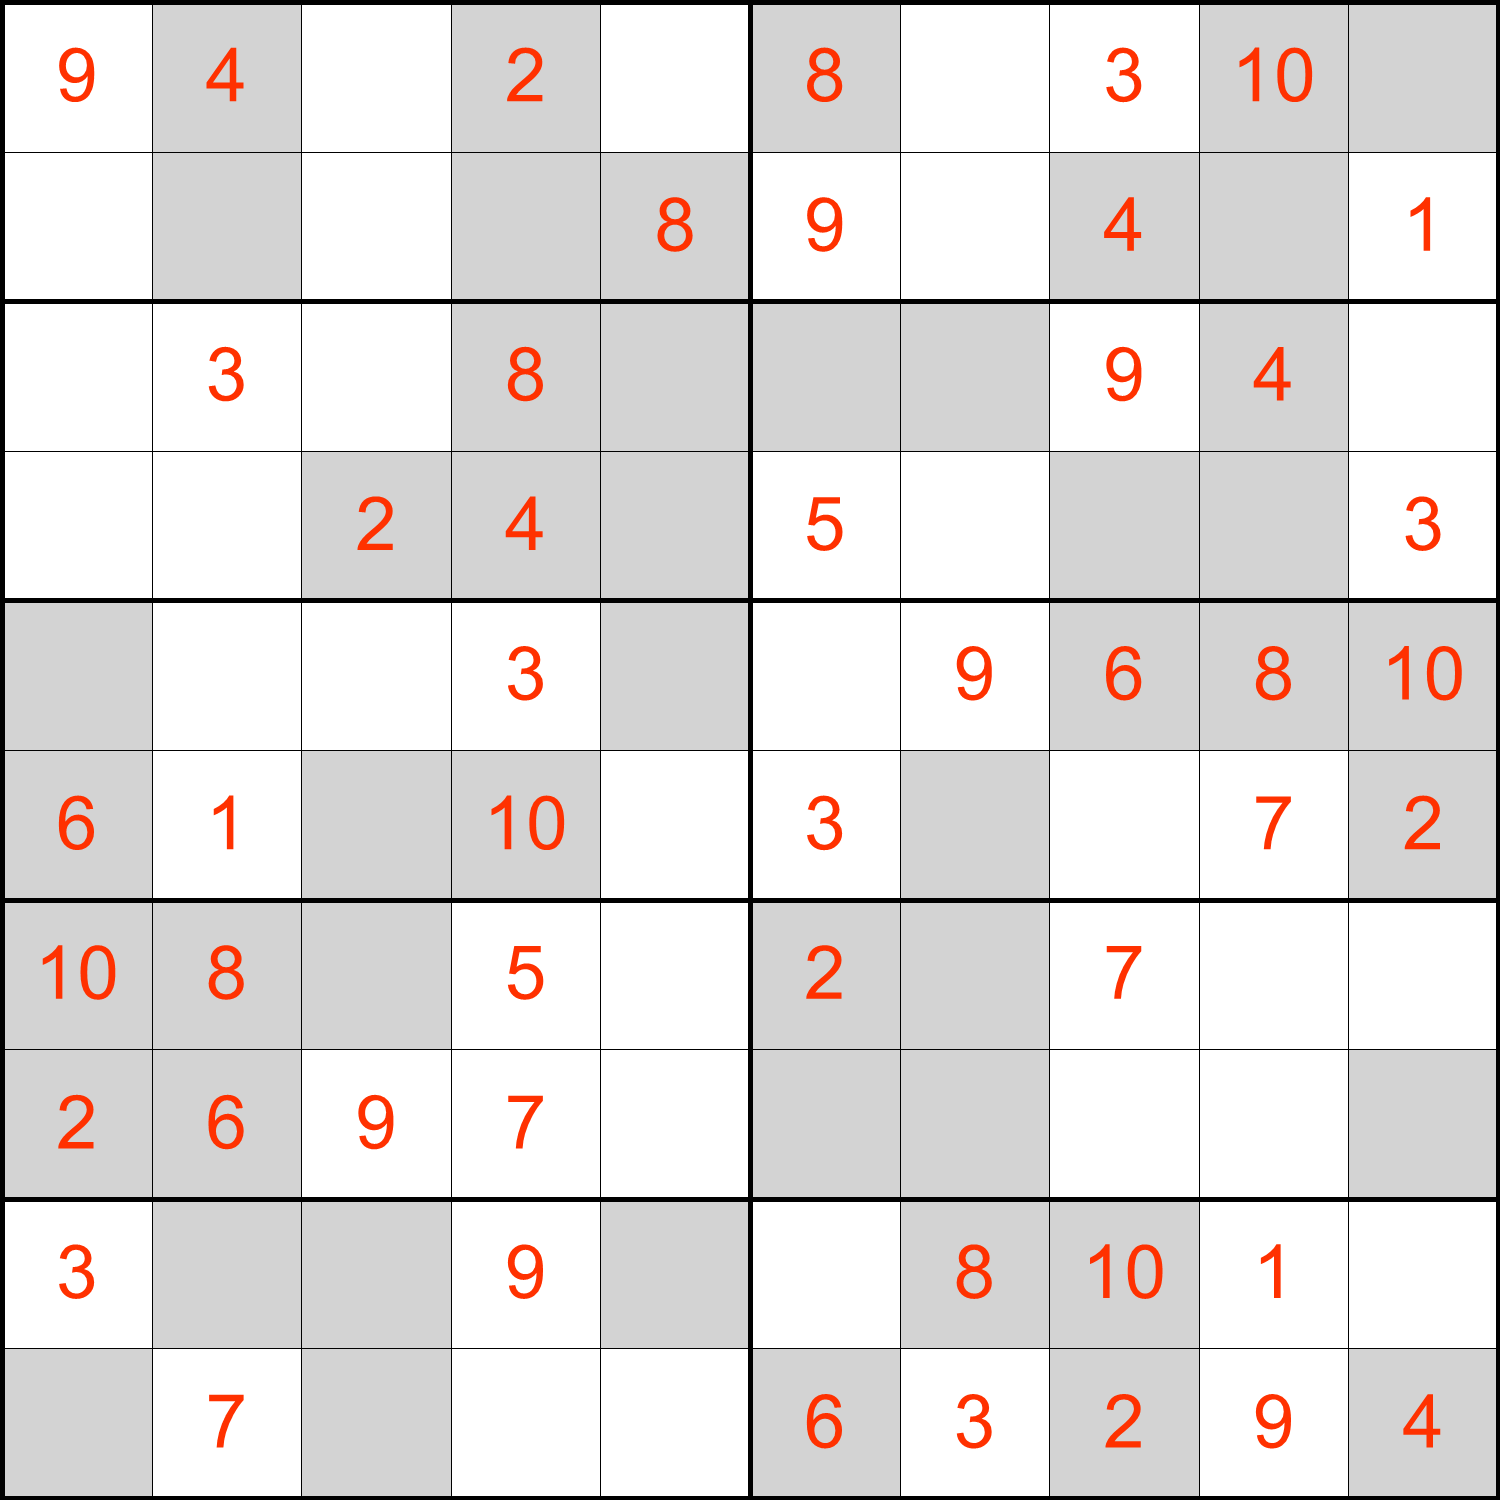 Two 4x4 sudoku for kids to print: Level Beginner, No. 1 and No. 2.